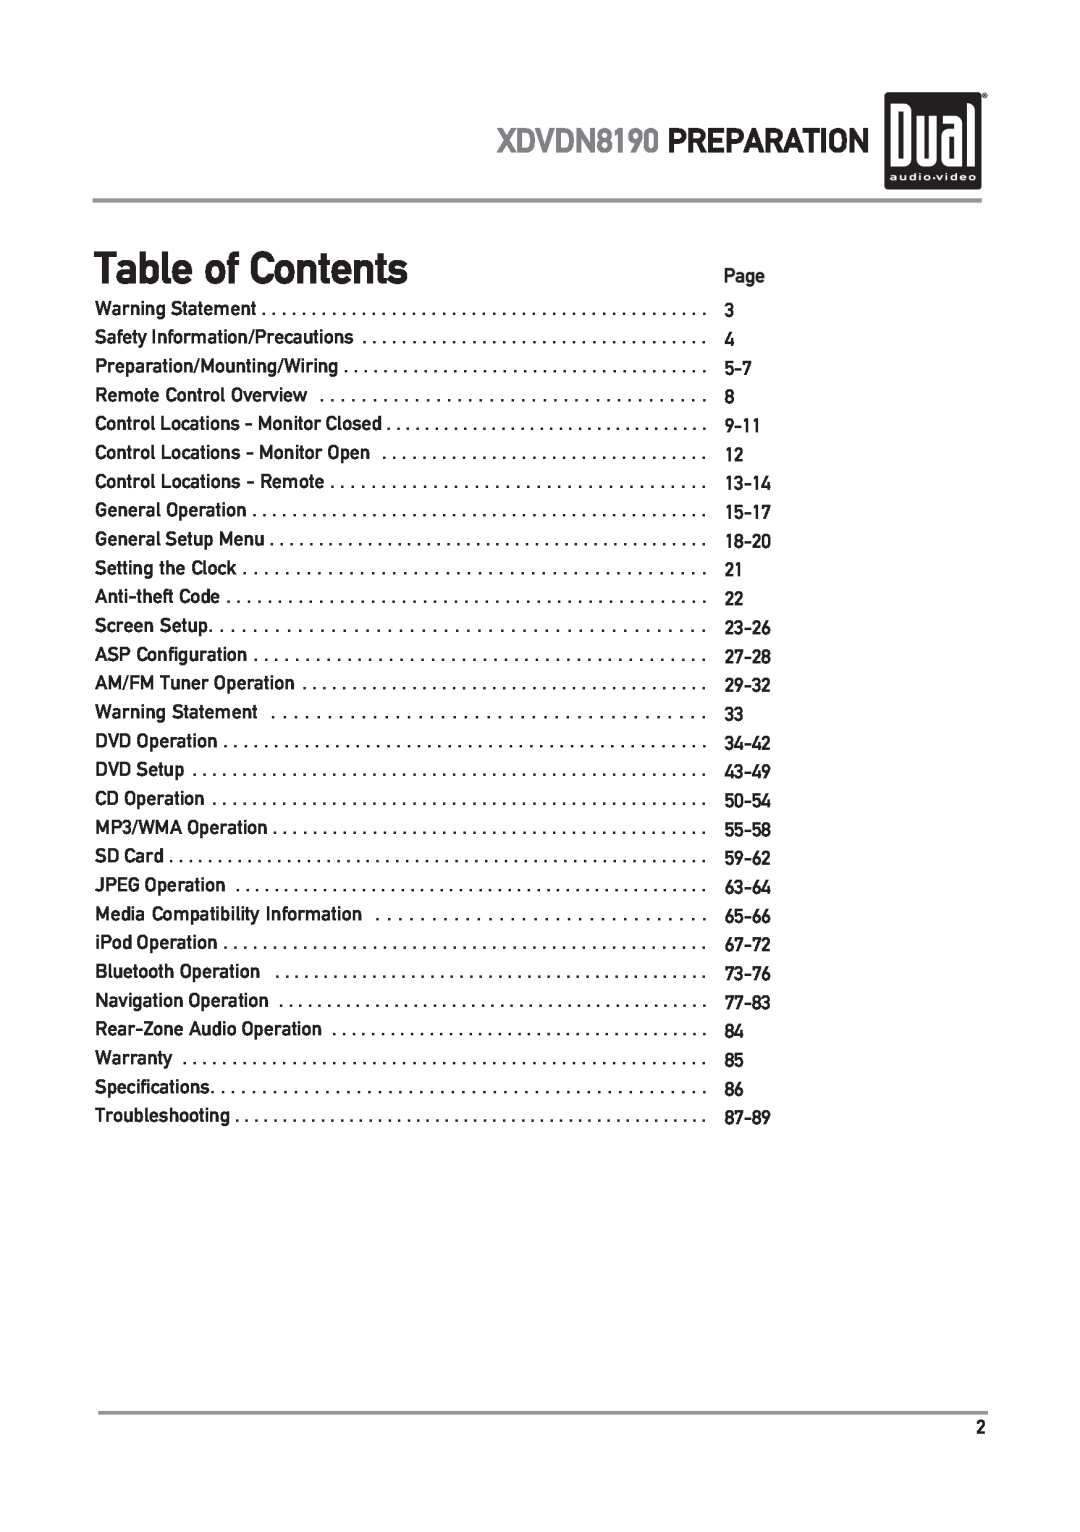 Dual owner manual Table of Contents, XDVDN8190 PREPARATION, Page 